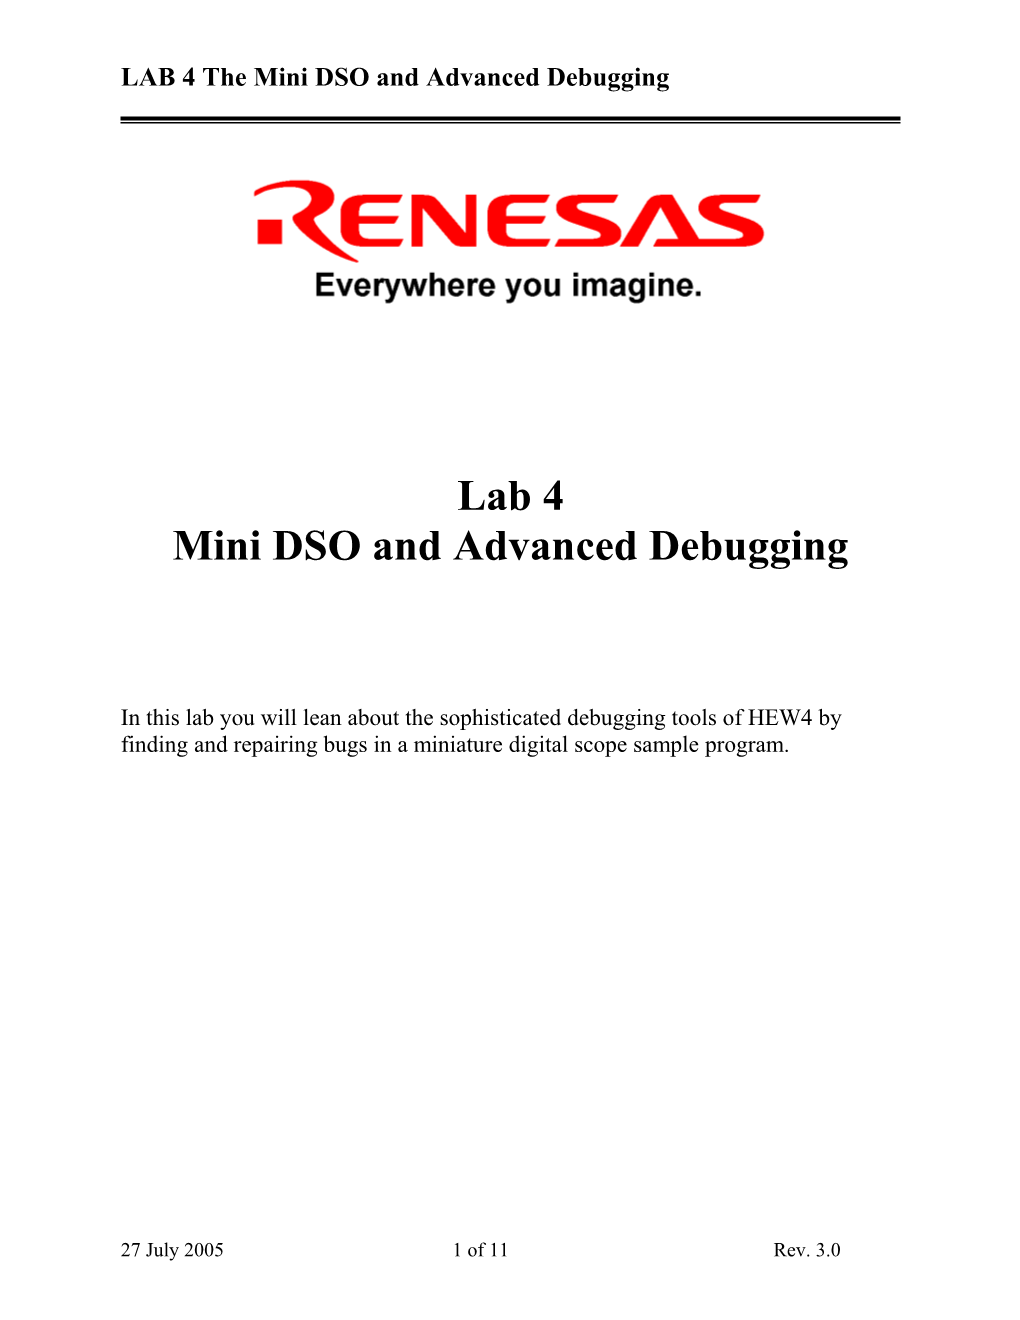 LAB 4 the Mini DSO and Advanced Debugging